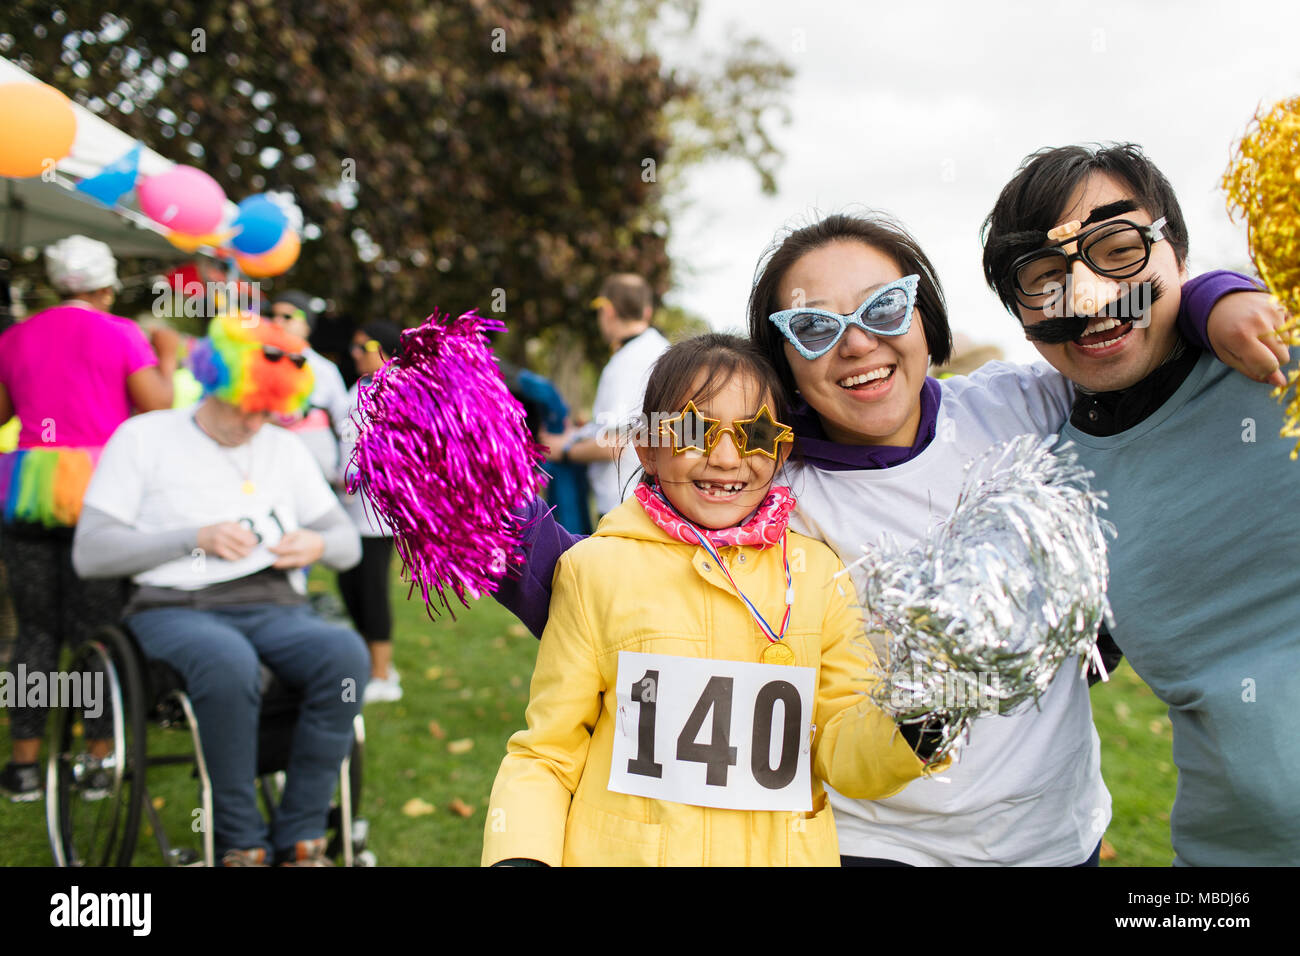 Portrait playful family wearing silly eyeglasses at charity run in park Stock Photo